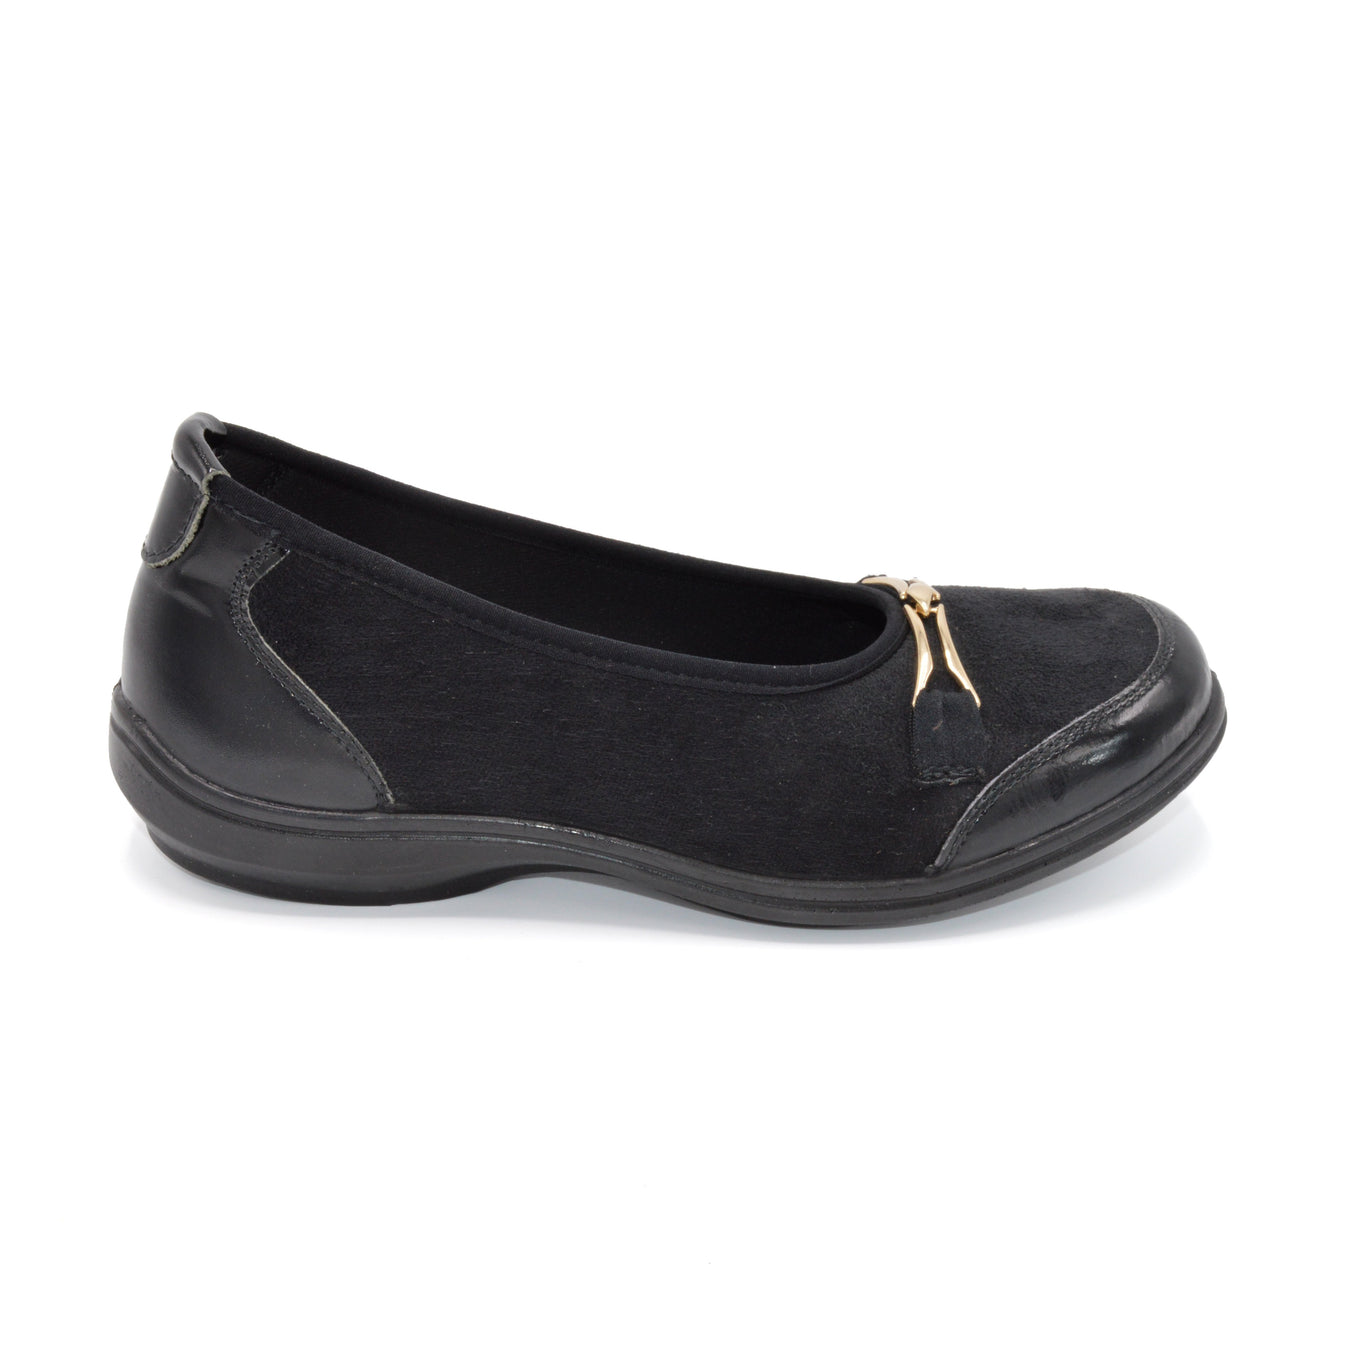 Ladies Wide Fitting Loafers and Ballet Pumps. DB Nailsea Extra Wide Fit